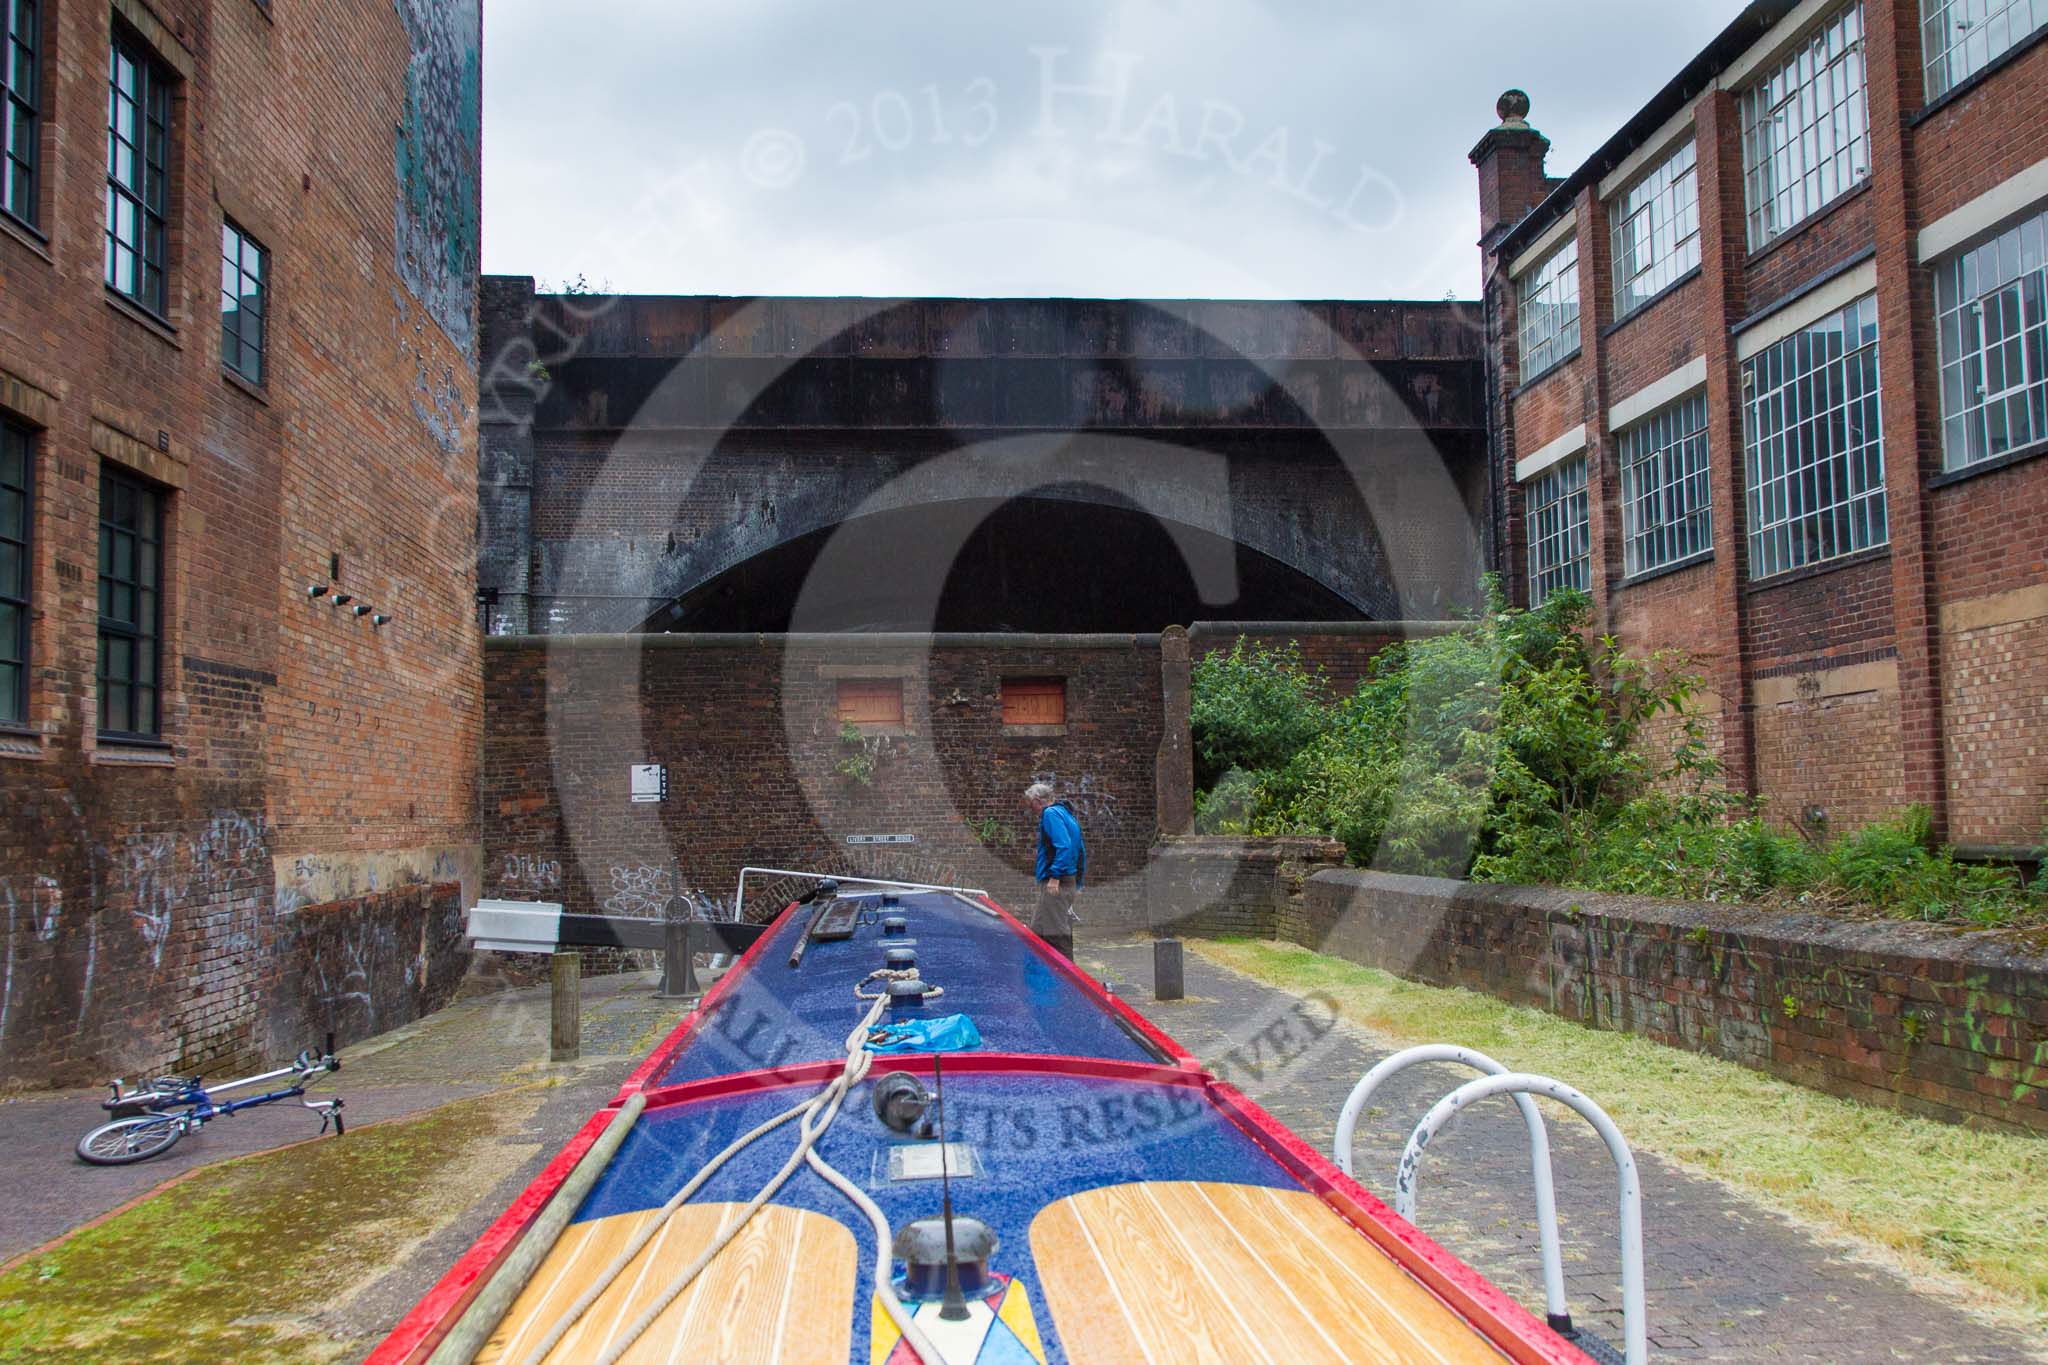 BCN Marathon Challenge 2014: Birmingham & Fazeley Canal, Farmers Bridge Locks: The canal continues, behind the lock, under Livery Street Bridge and the much later built railway bridge..
Birmingham Canal Navigation,


United Kingdom,
on 23 May 2014 at 15:01, image #37